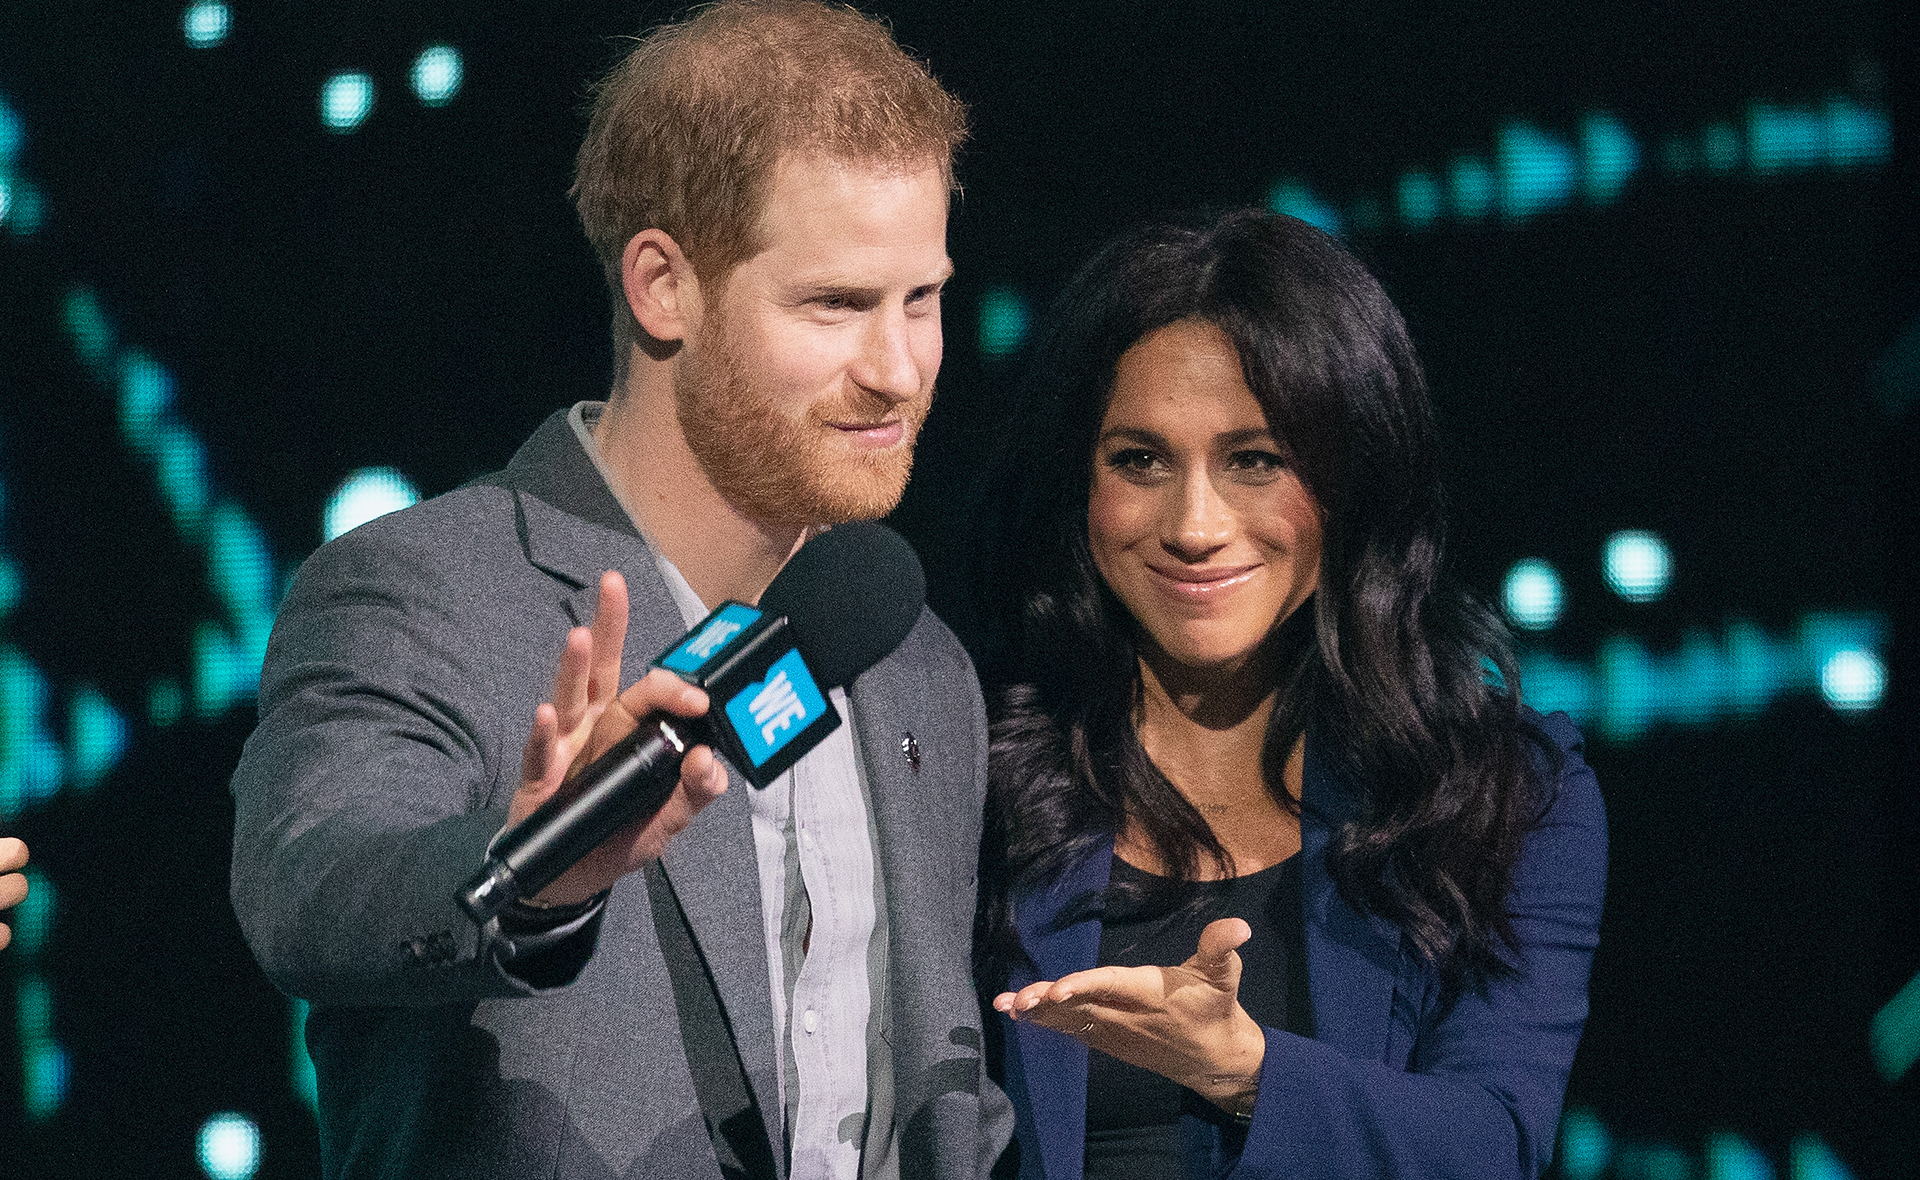 Prince Harry and Meghan Markle are about to make their first public appearance since Lilibet’s birth